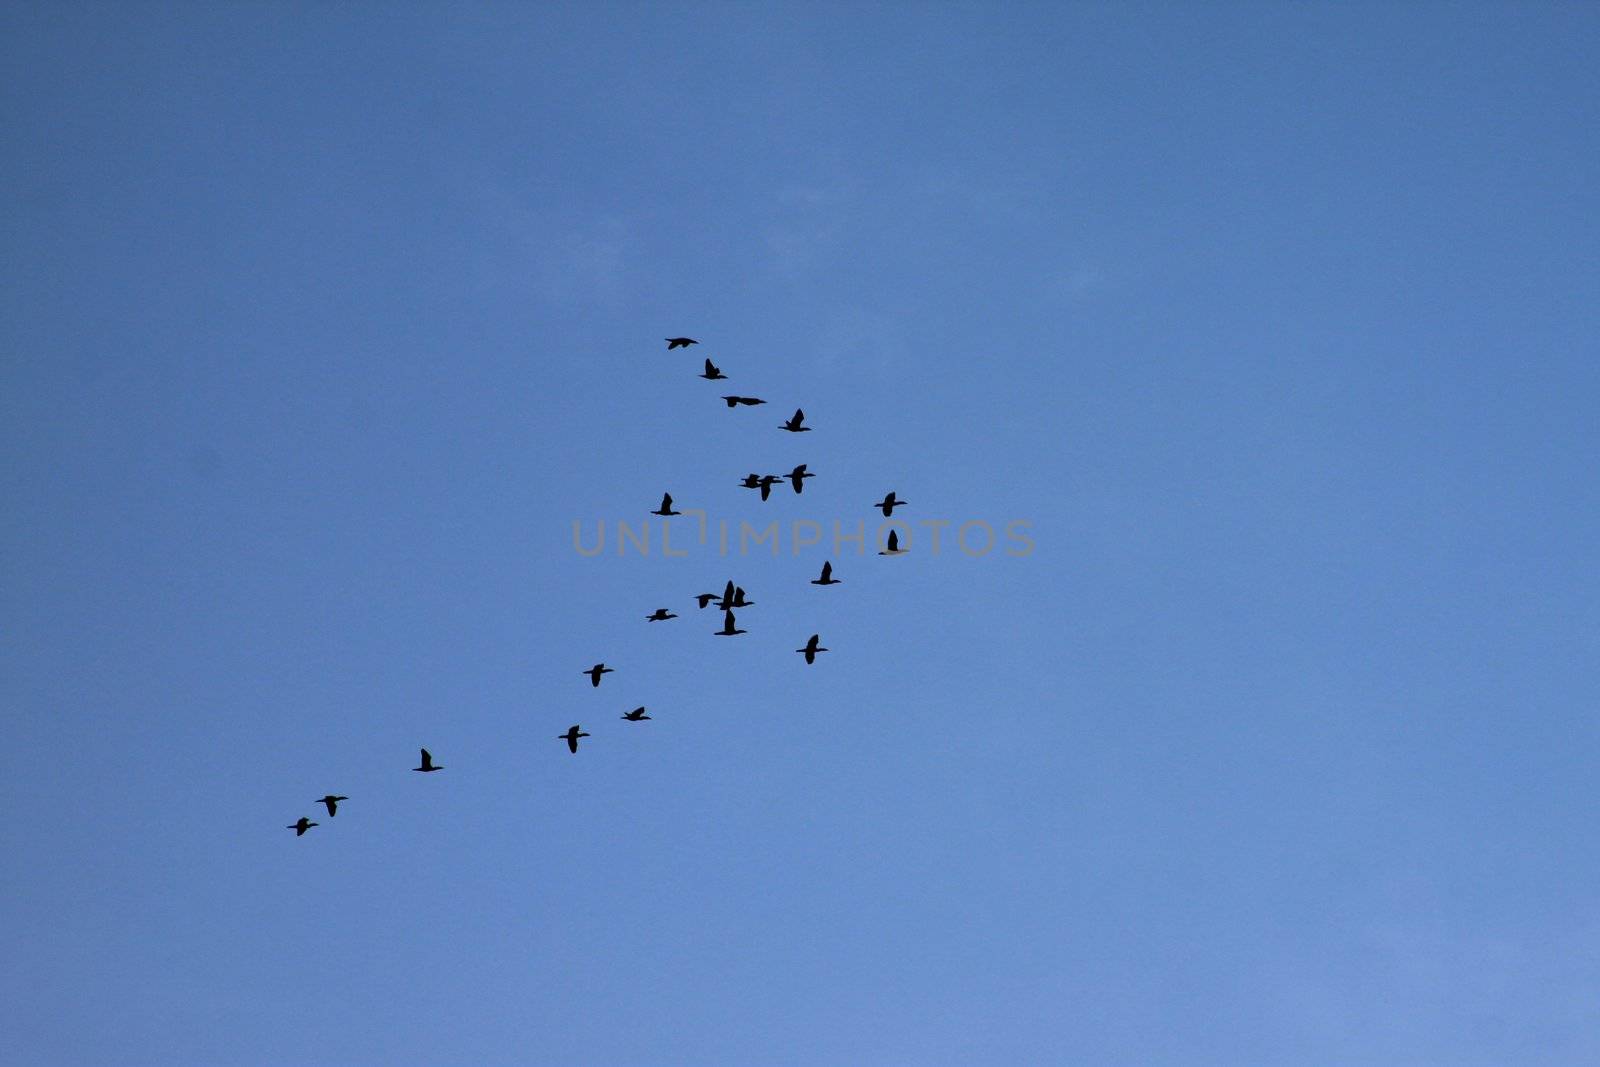 Flock of Canadian geese flying formation on a blue sky backdrop